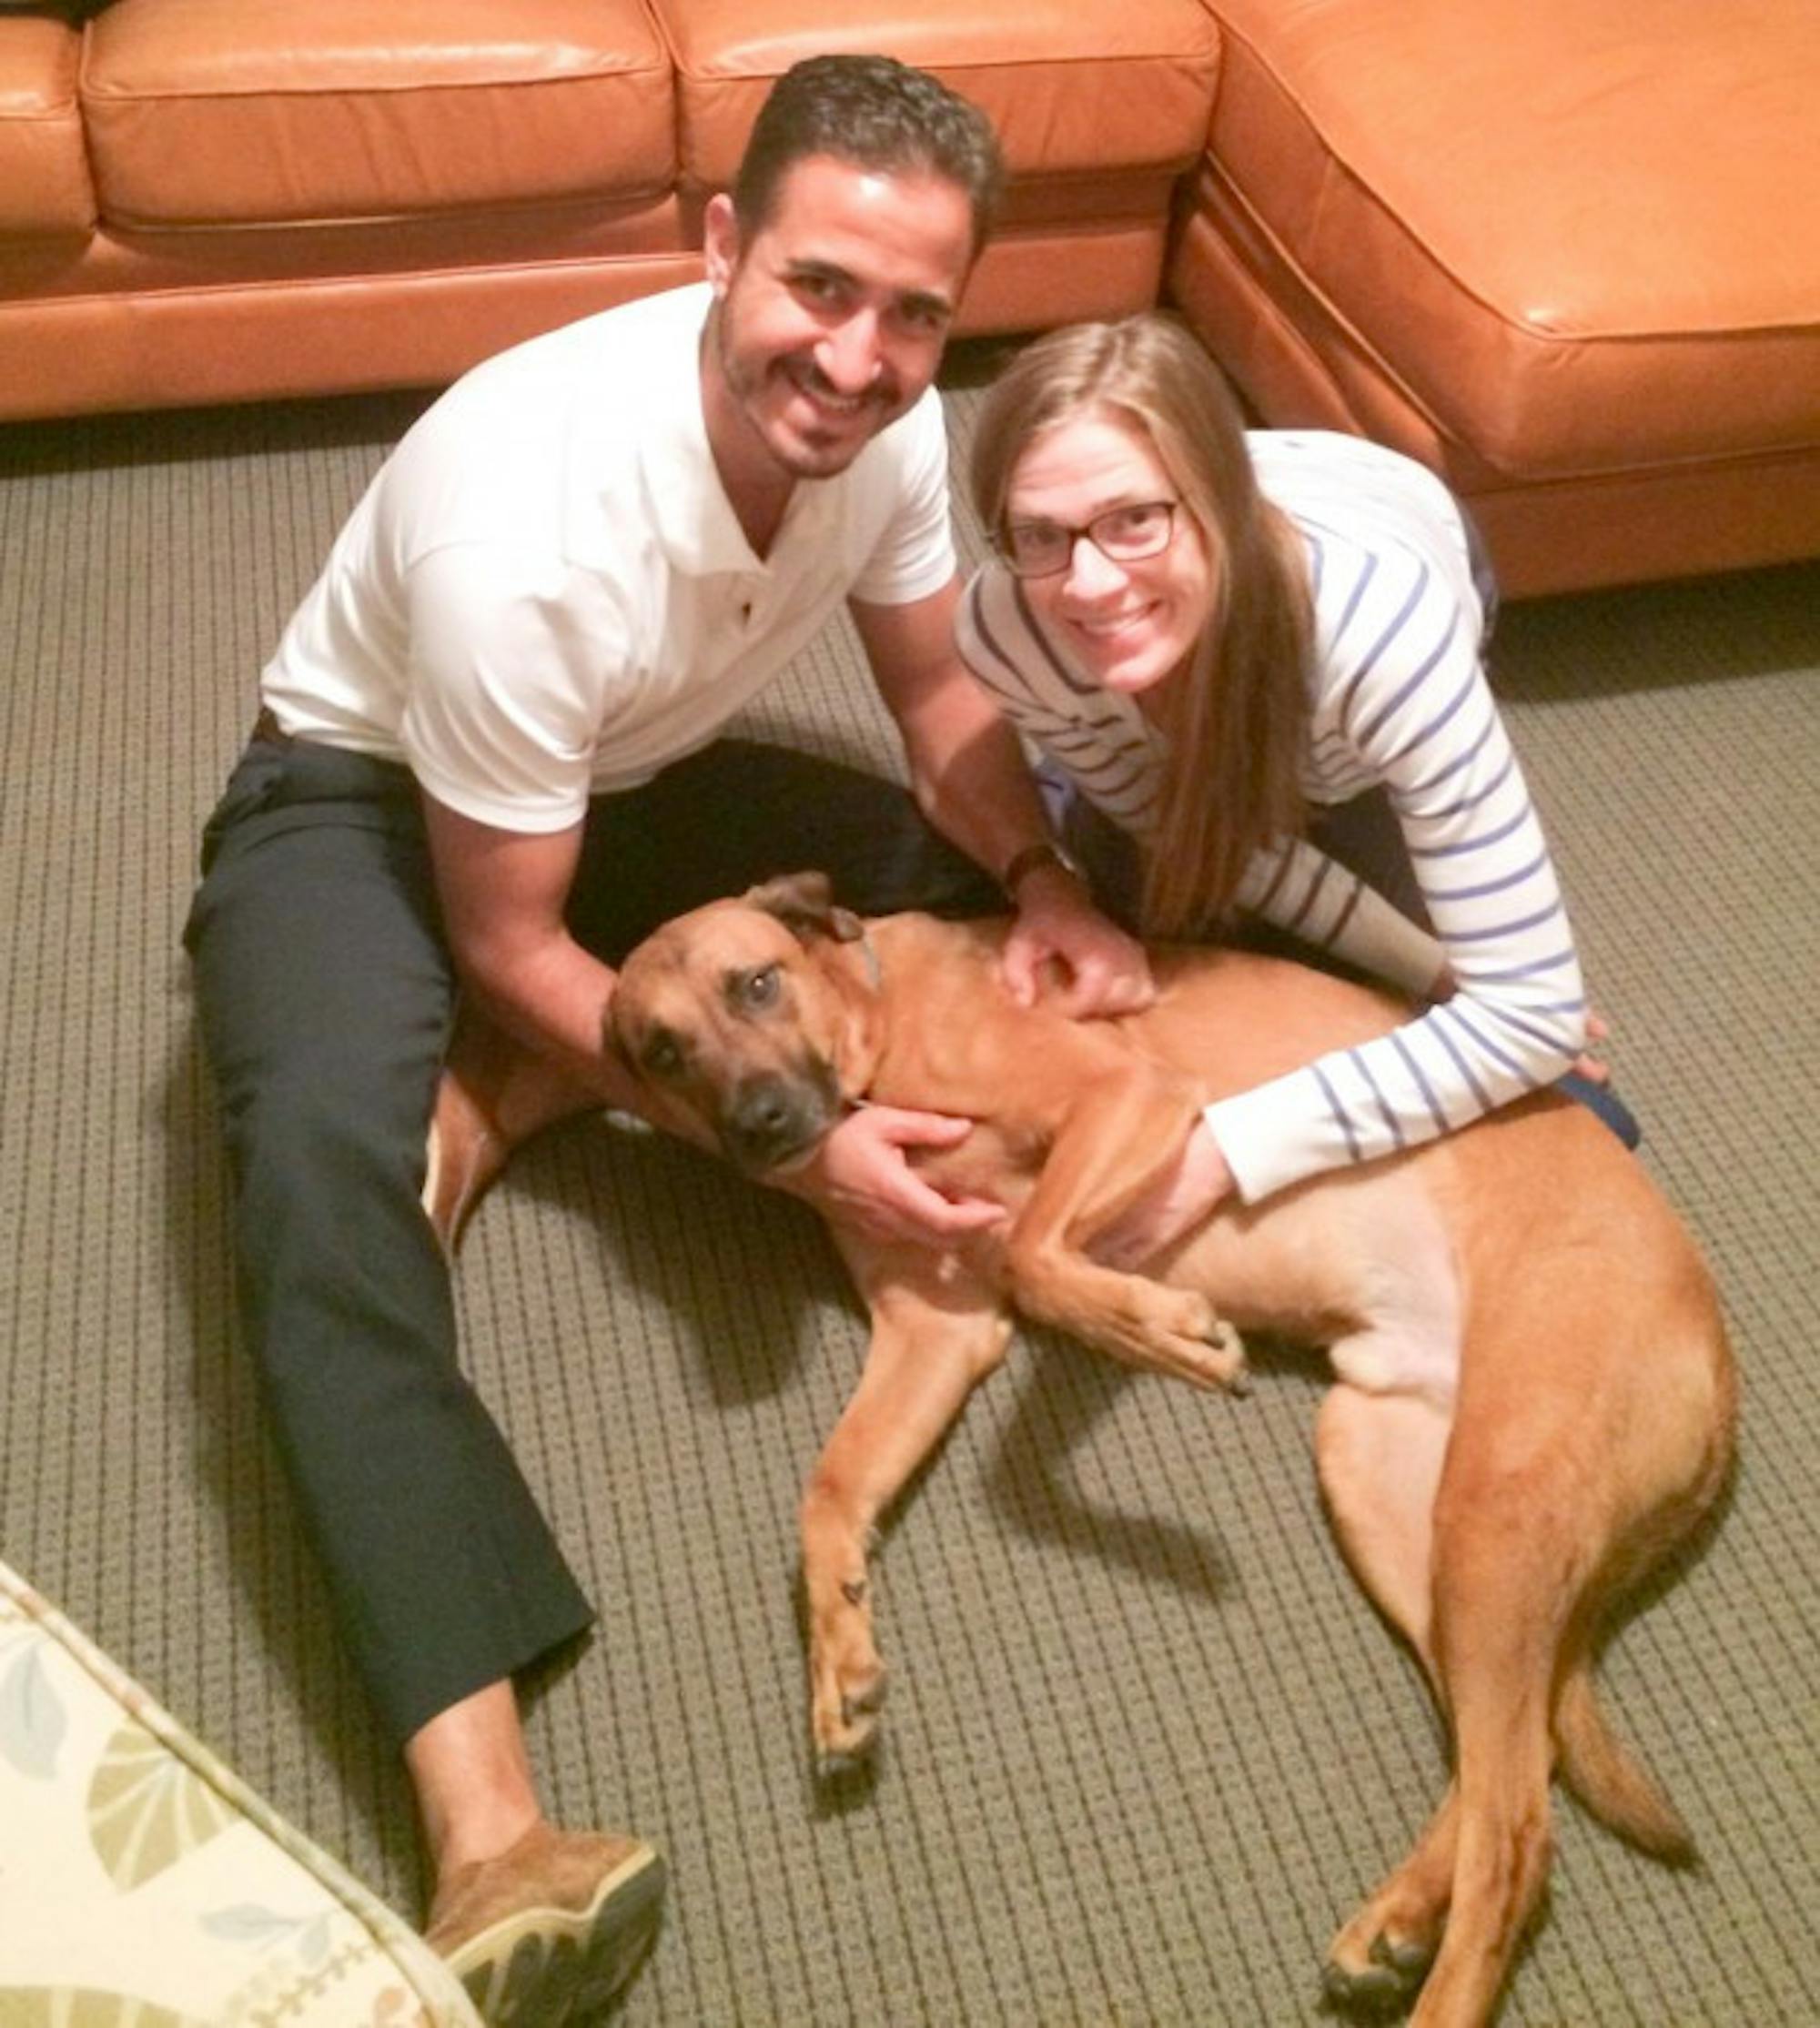 Keenan Hall rector Noel Terranova and his wife Jaclyn pose with their dog, The Goose, who lives with them in the dorm.